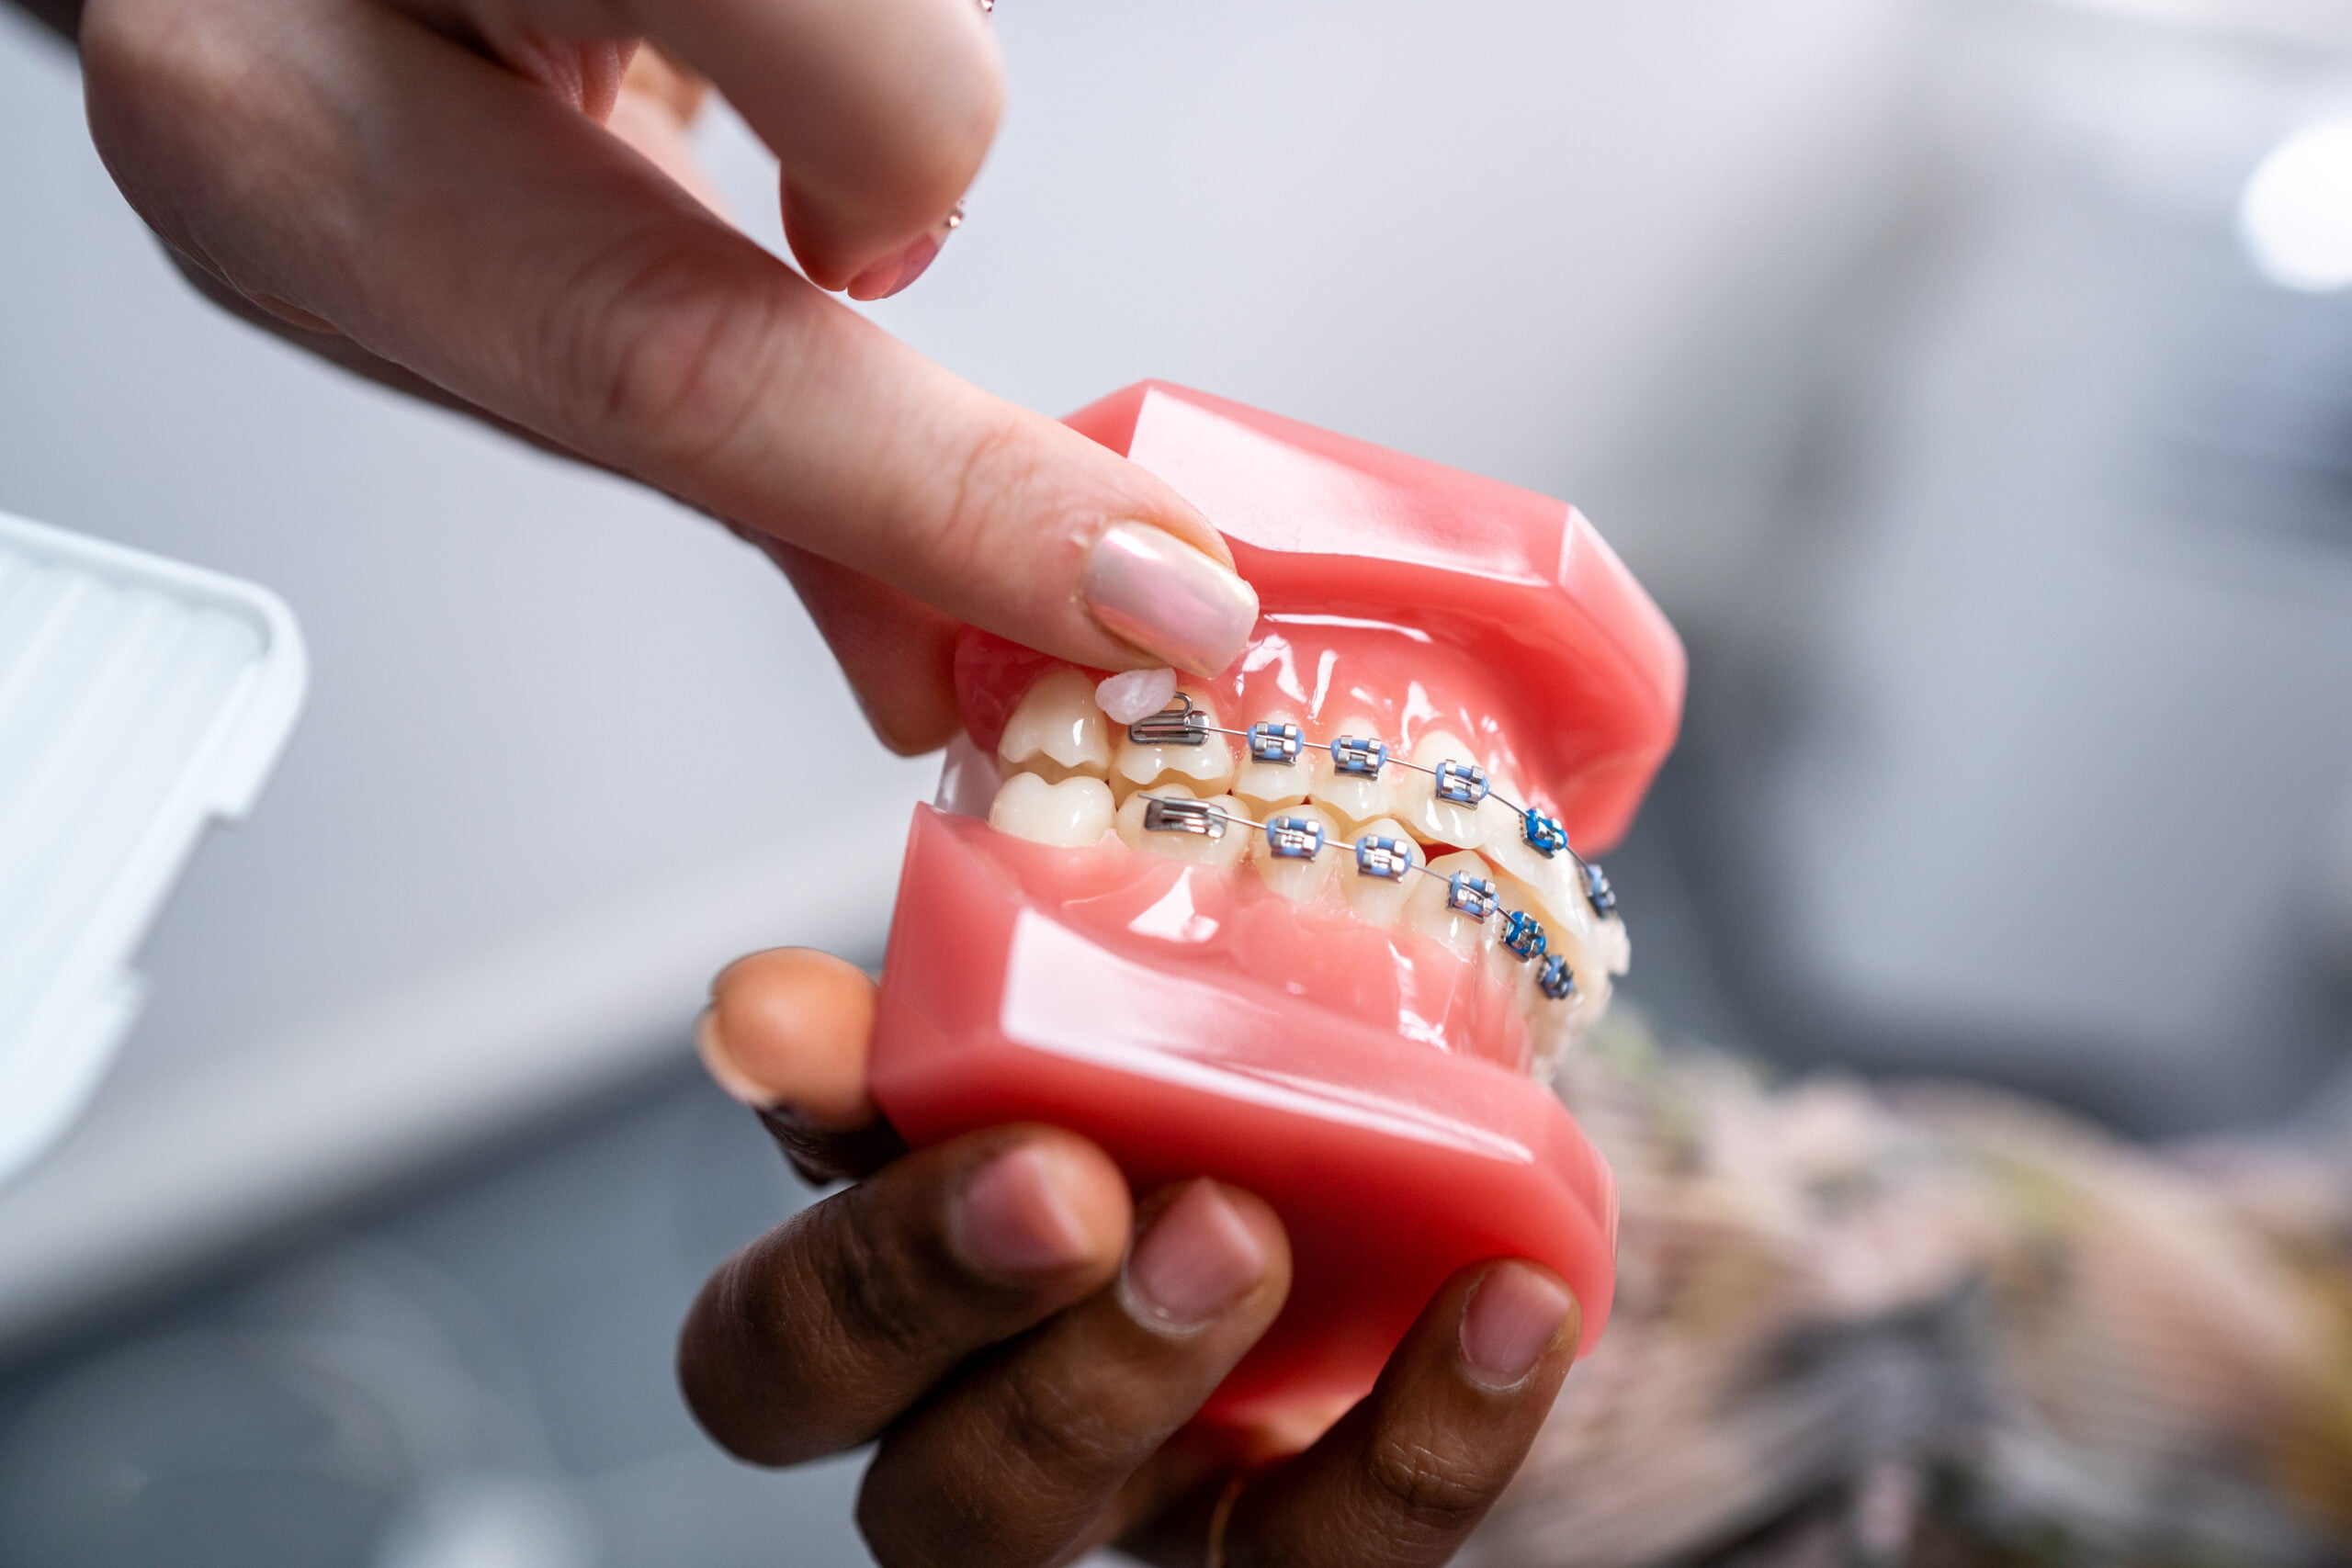 How to care for your braces